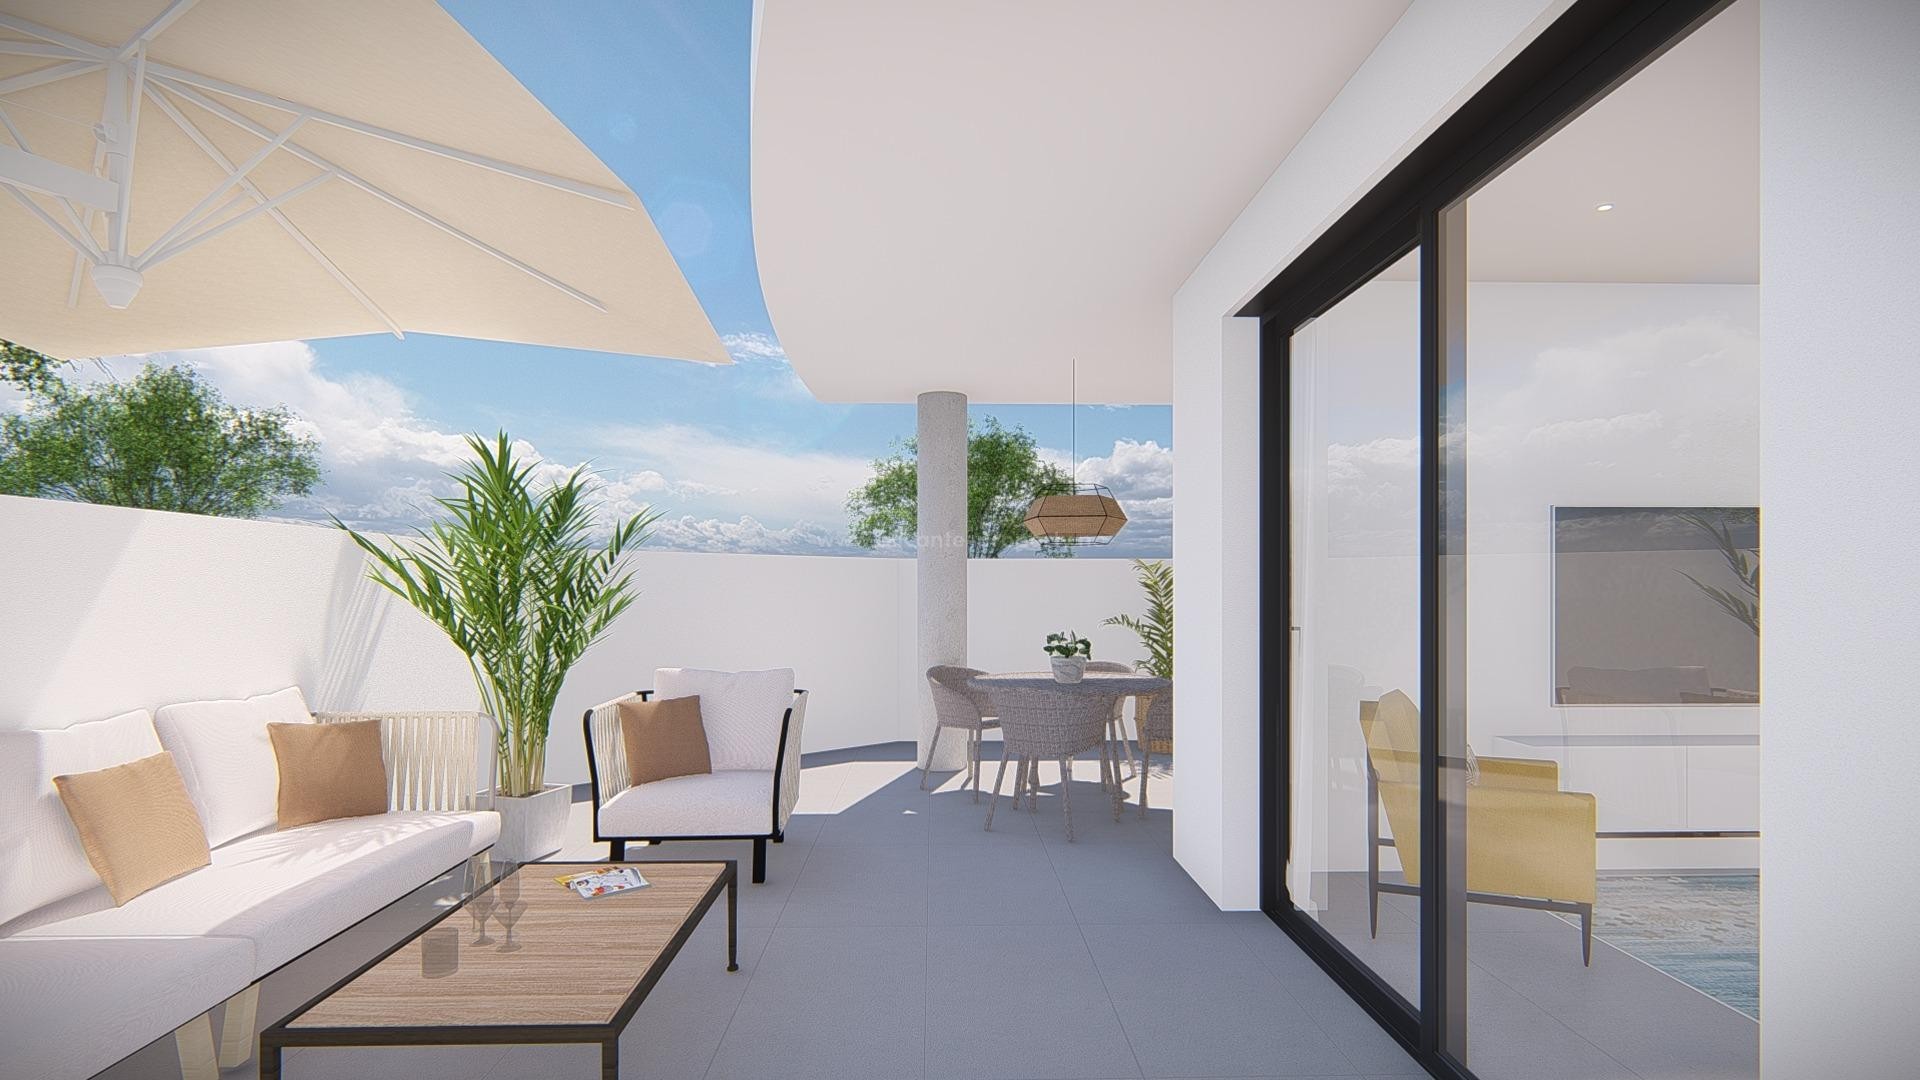 New apartments/flats in Villajoyosa by the sea, 2/3 bedrooms, 2 bathrooms, terrace, solarium or garden. Communal swimming pool and garage. 5 minutes from the beach